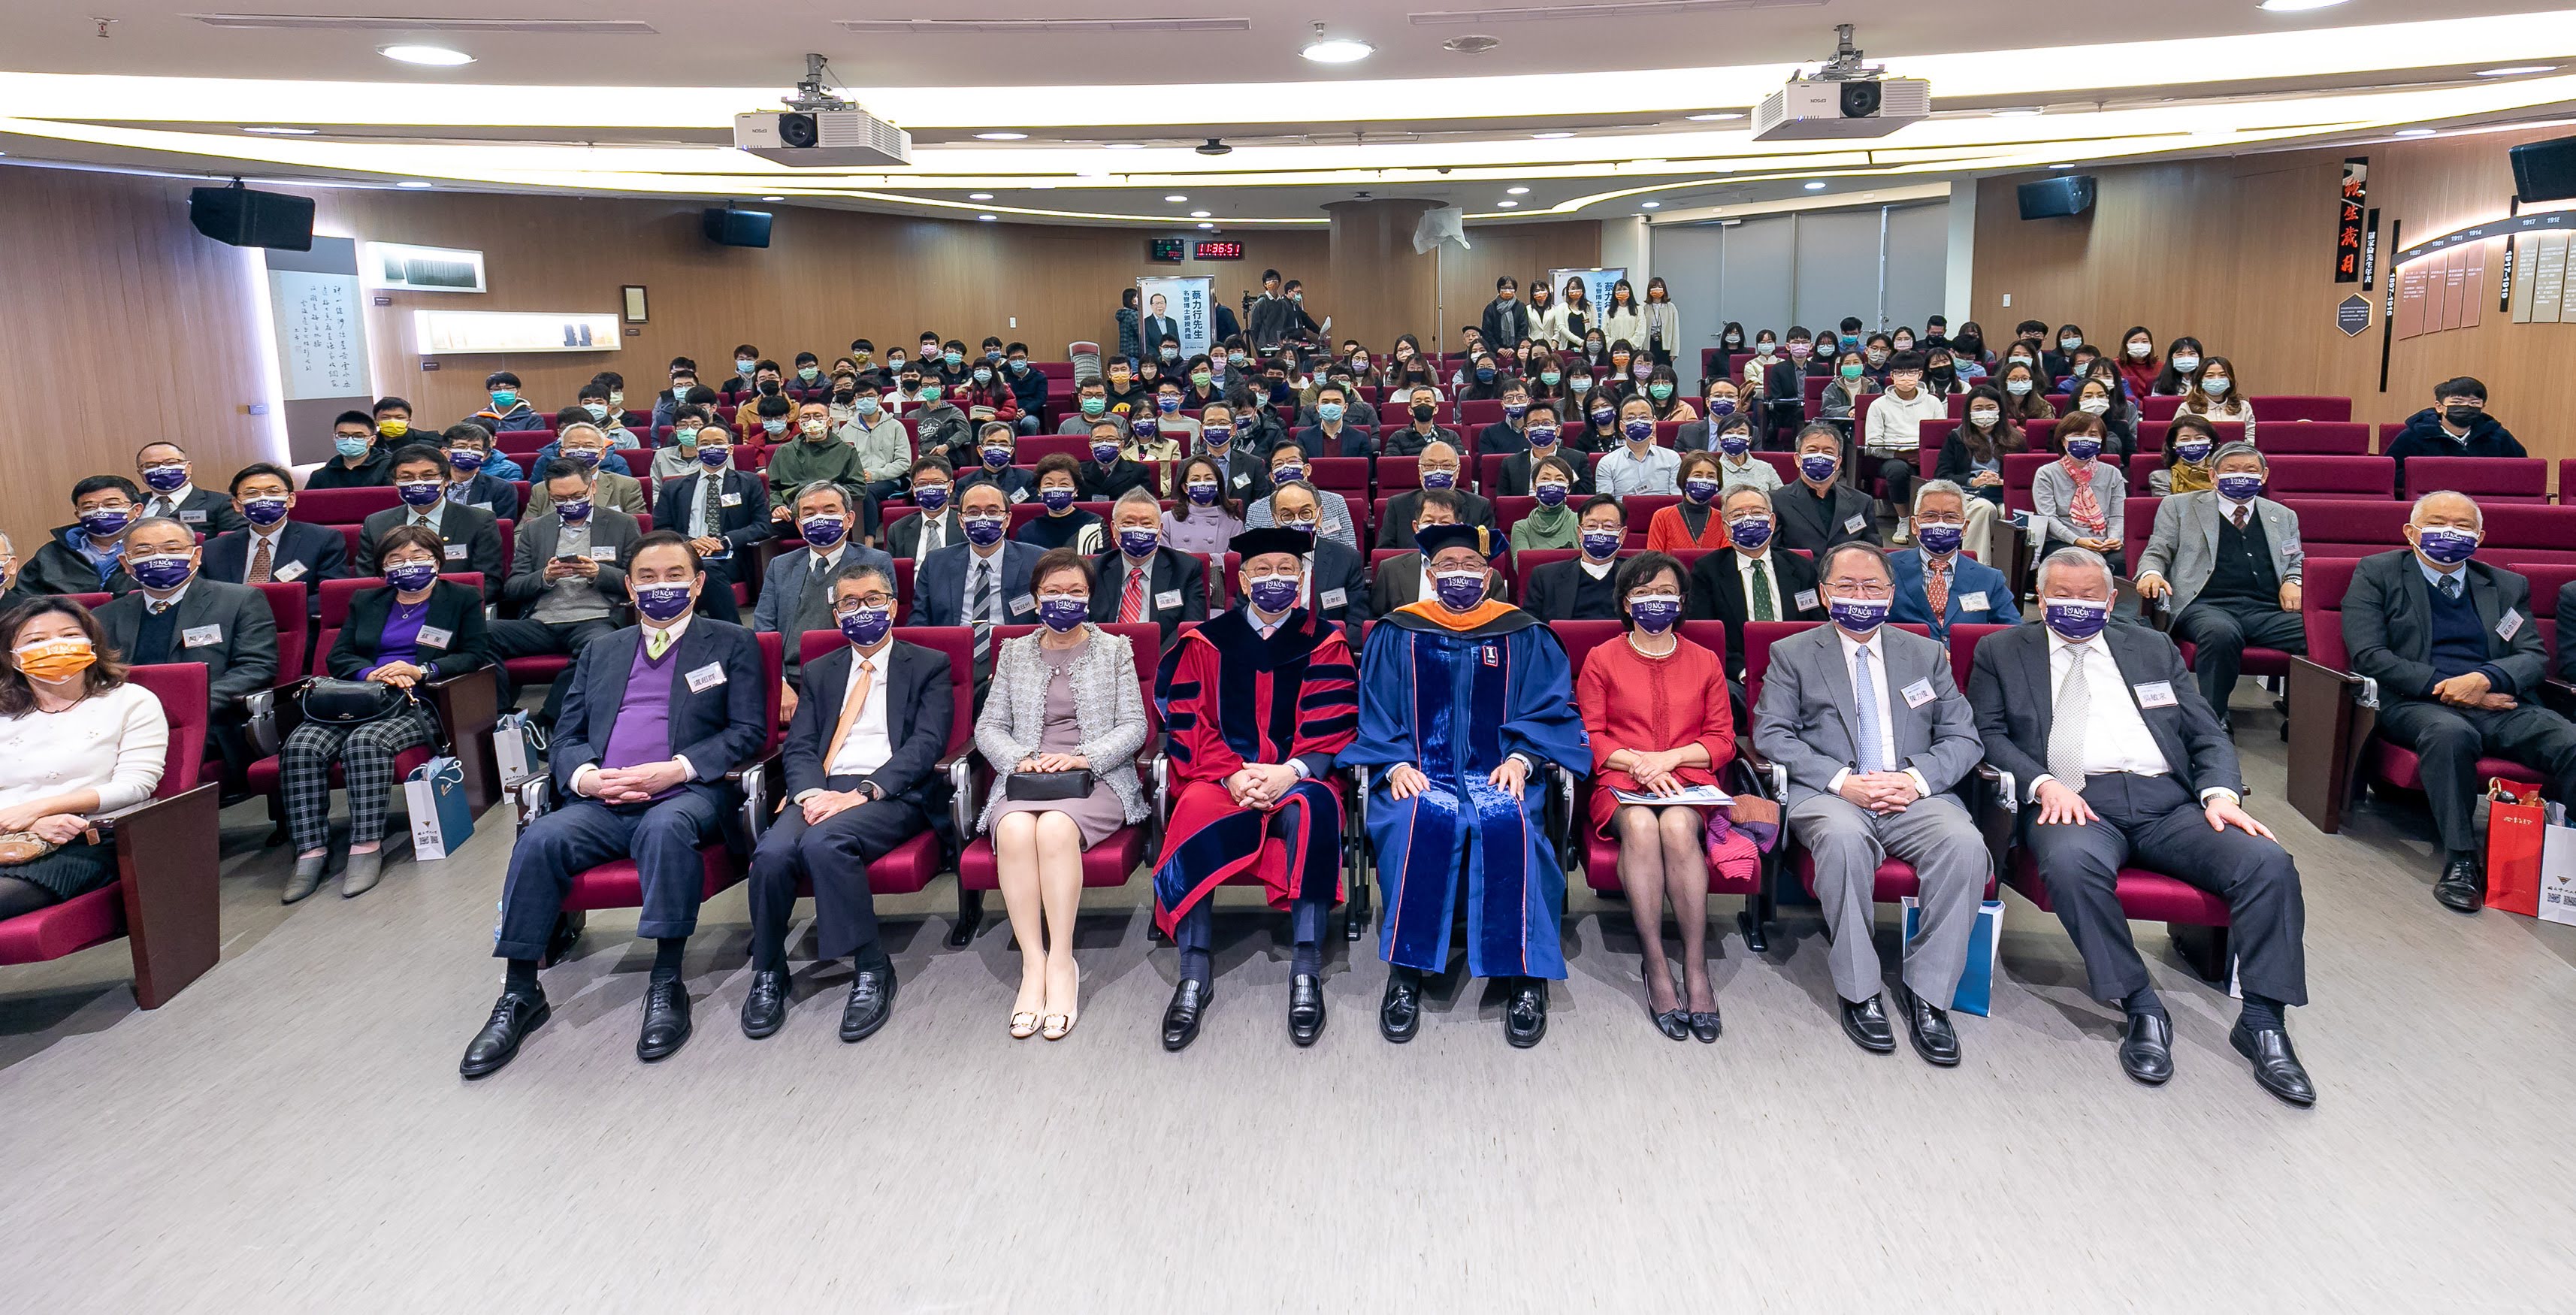 A group photo at the star-studded honorary doctorate ceremony for Dr. Rick Tsai. Photo courtesy: MediaTek Inc.